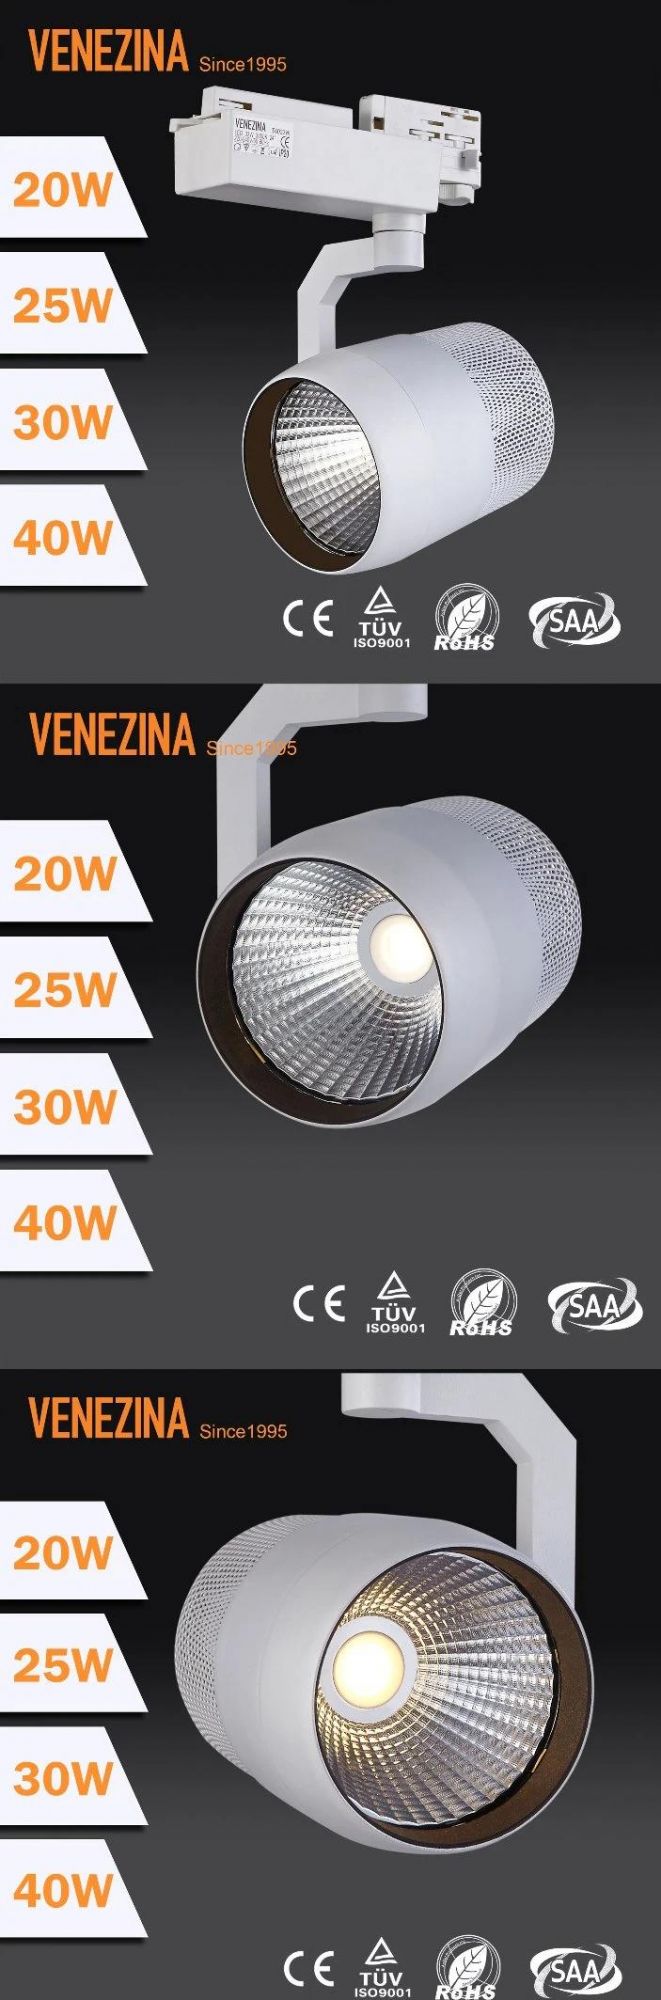 Commercial Interior Lighting CREE or Citizen High CRI Lighting 20W 25W 30W 40W COB LED Track Light for Shopping Mall